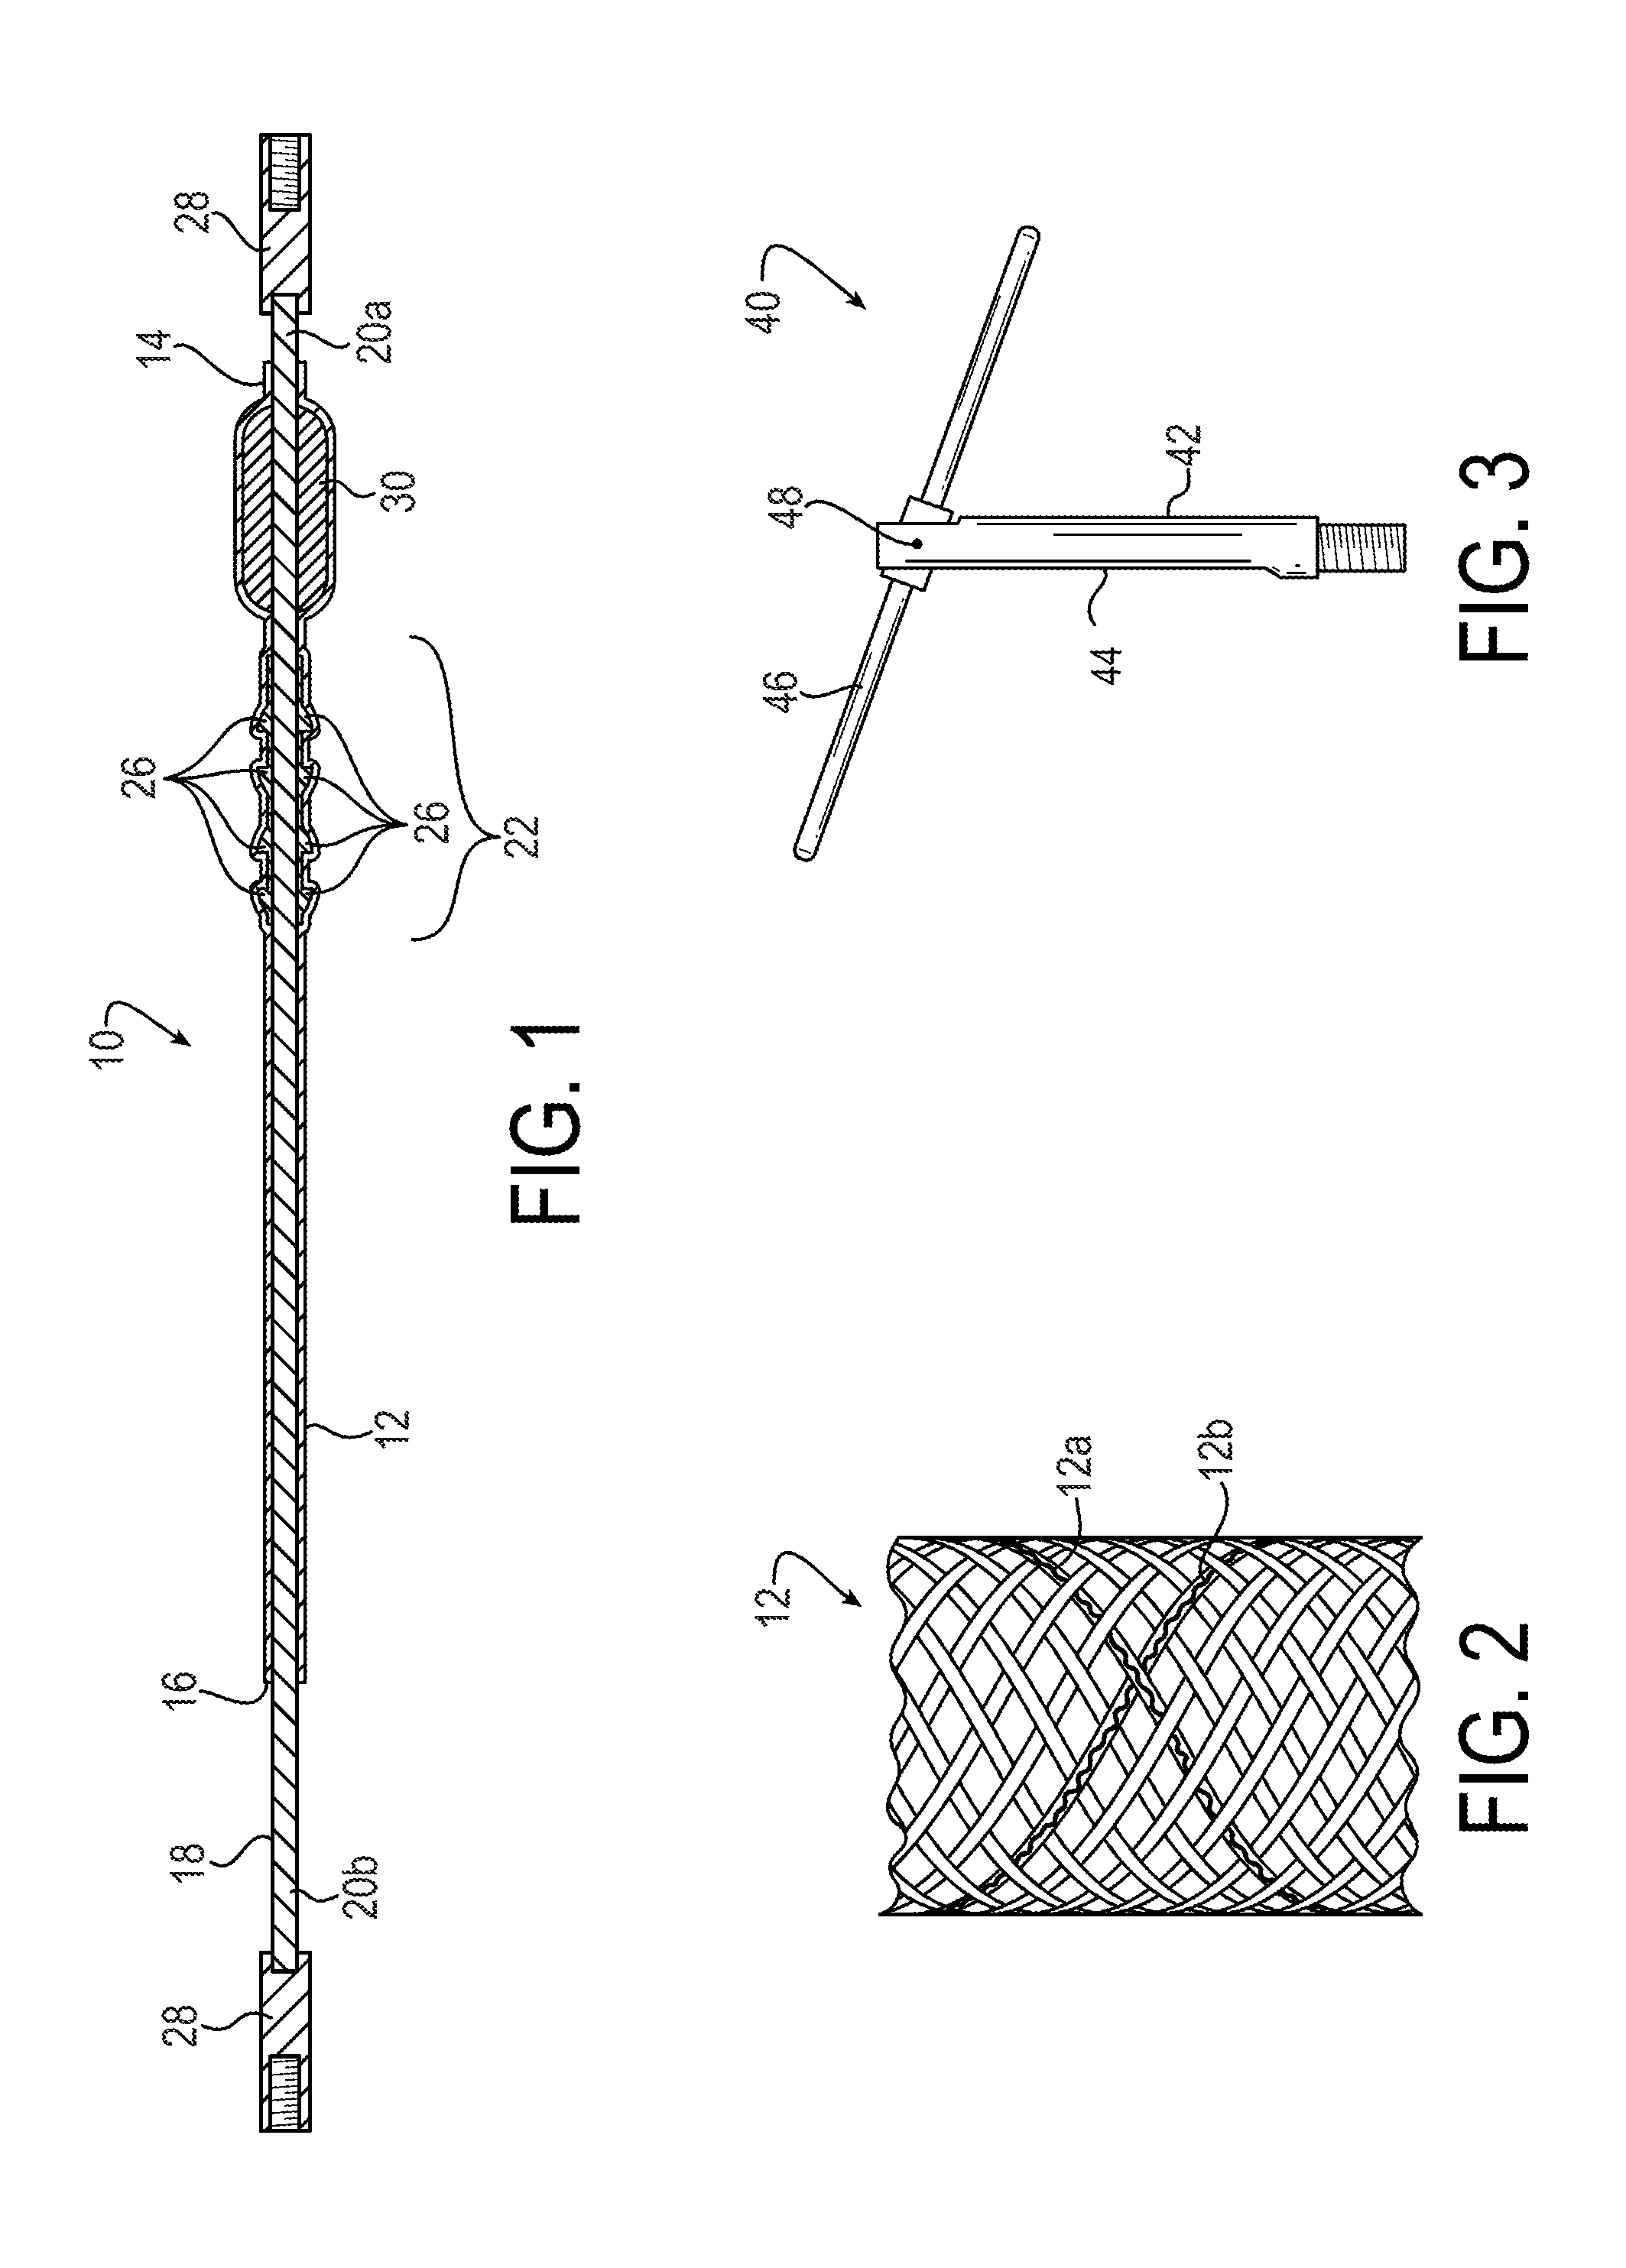 Apparatus and method for cleaning the barrel of a firearm